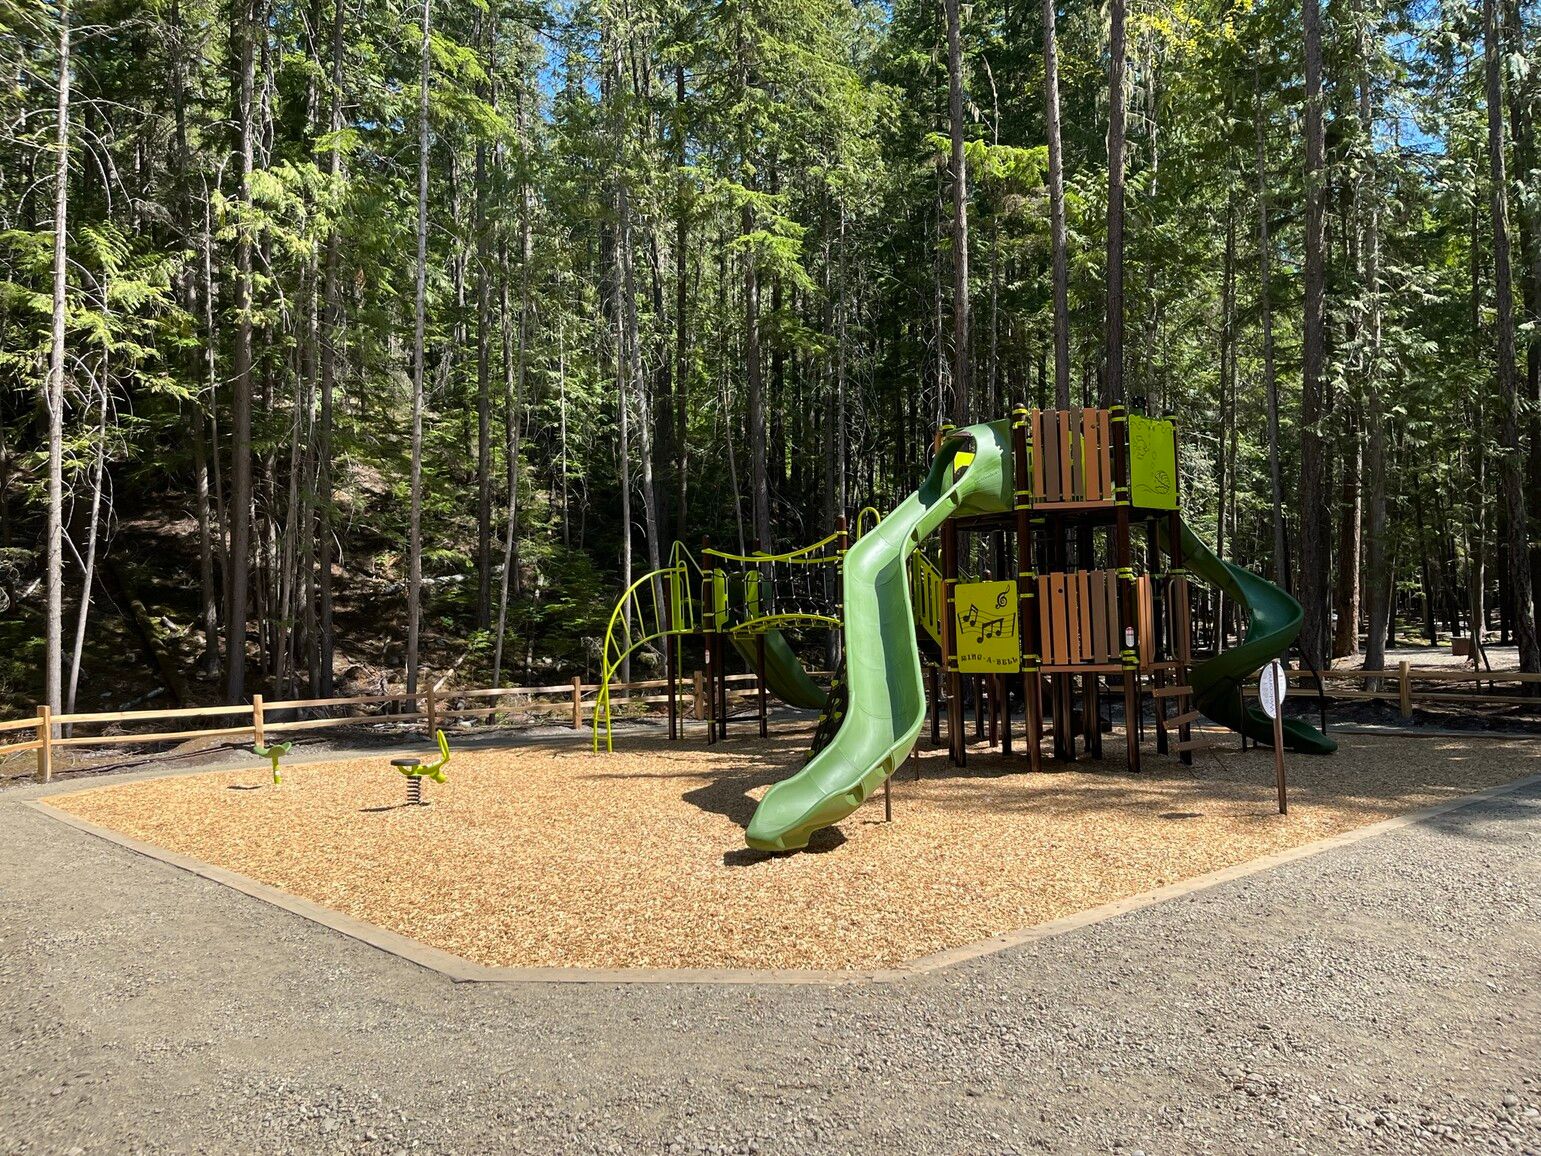 Rosebery Park playground. A great place for kids to have fun while camping or just enjoying a day at the park.